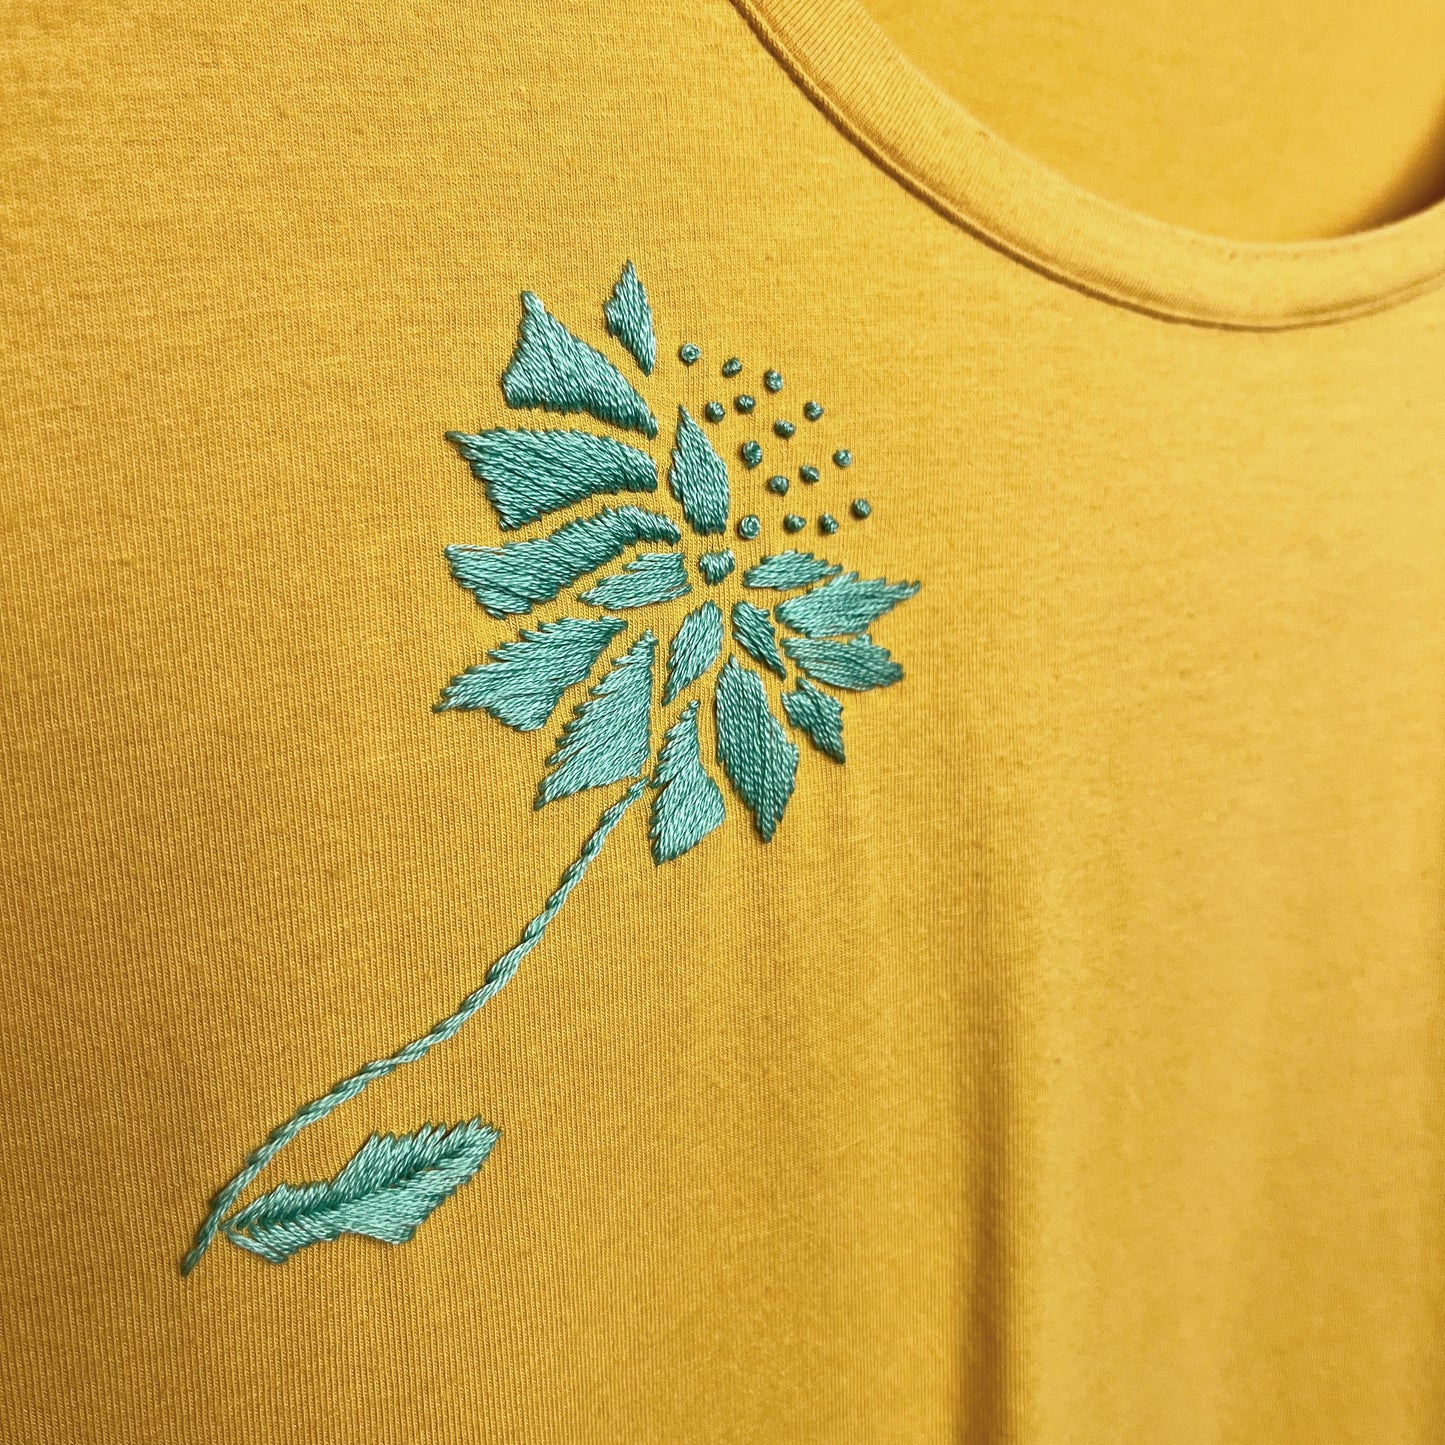 a hand embroidered abstract aqua colored dandelion on a mustard yellow t-shirt, close up